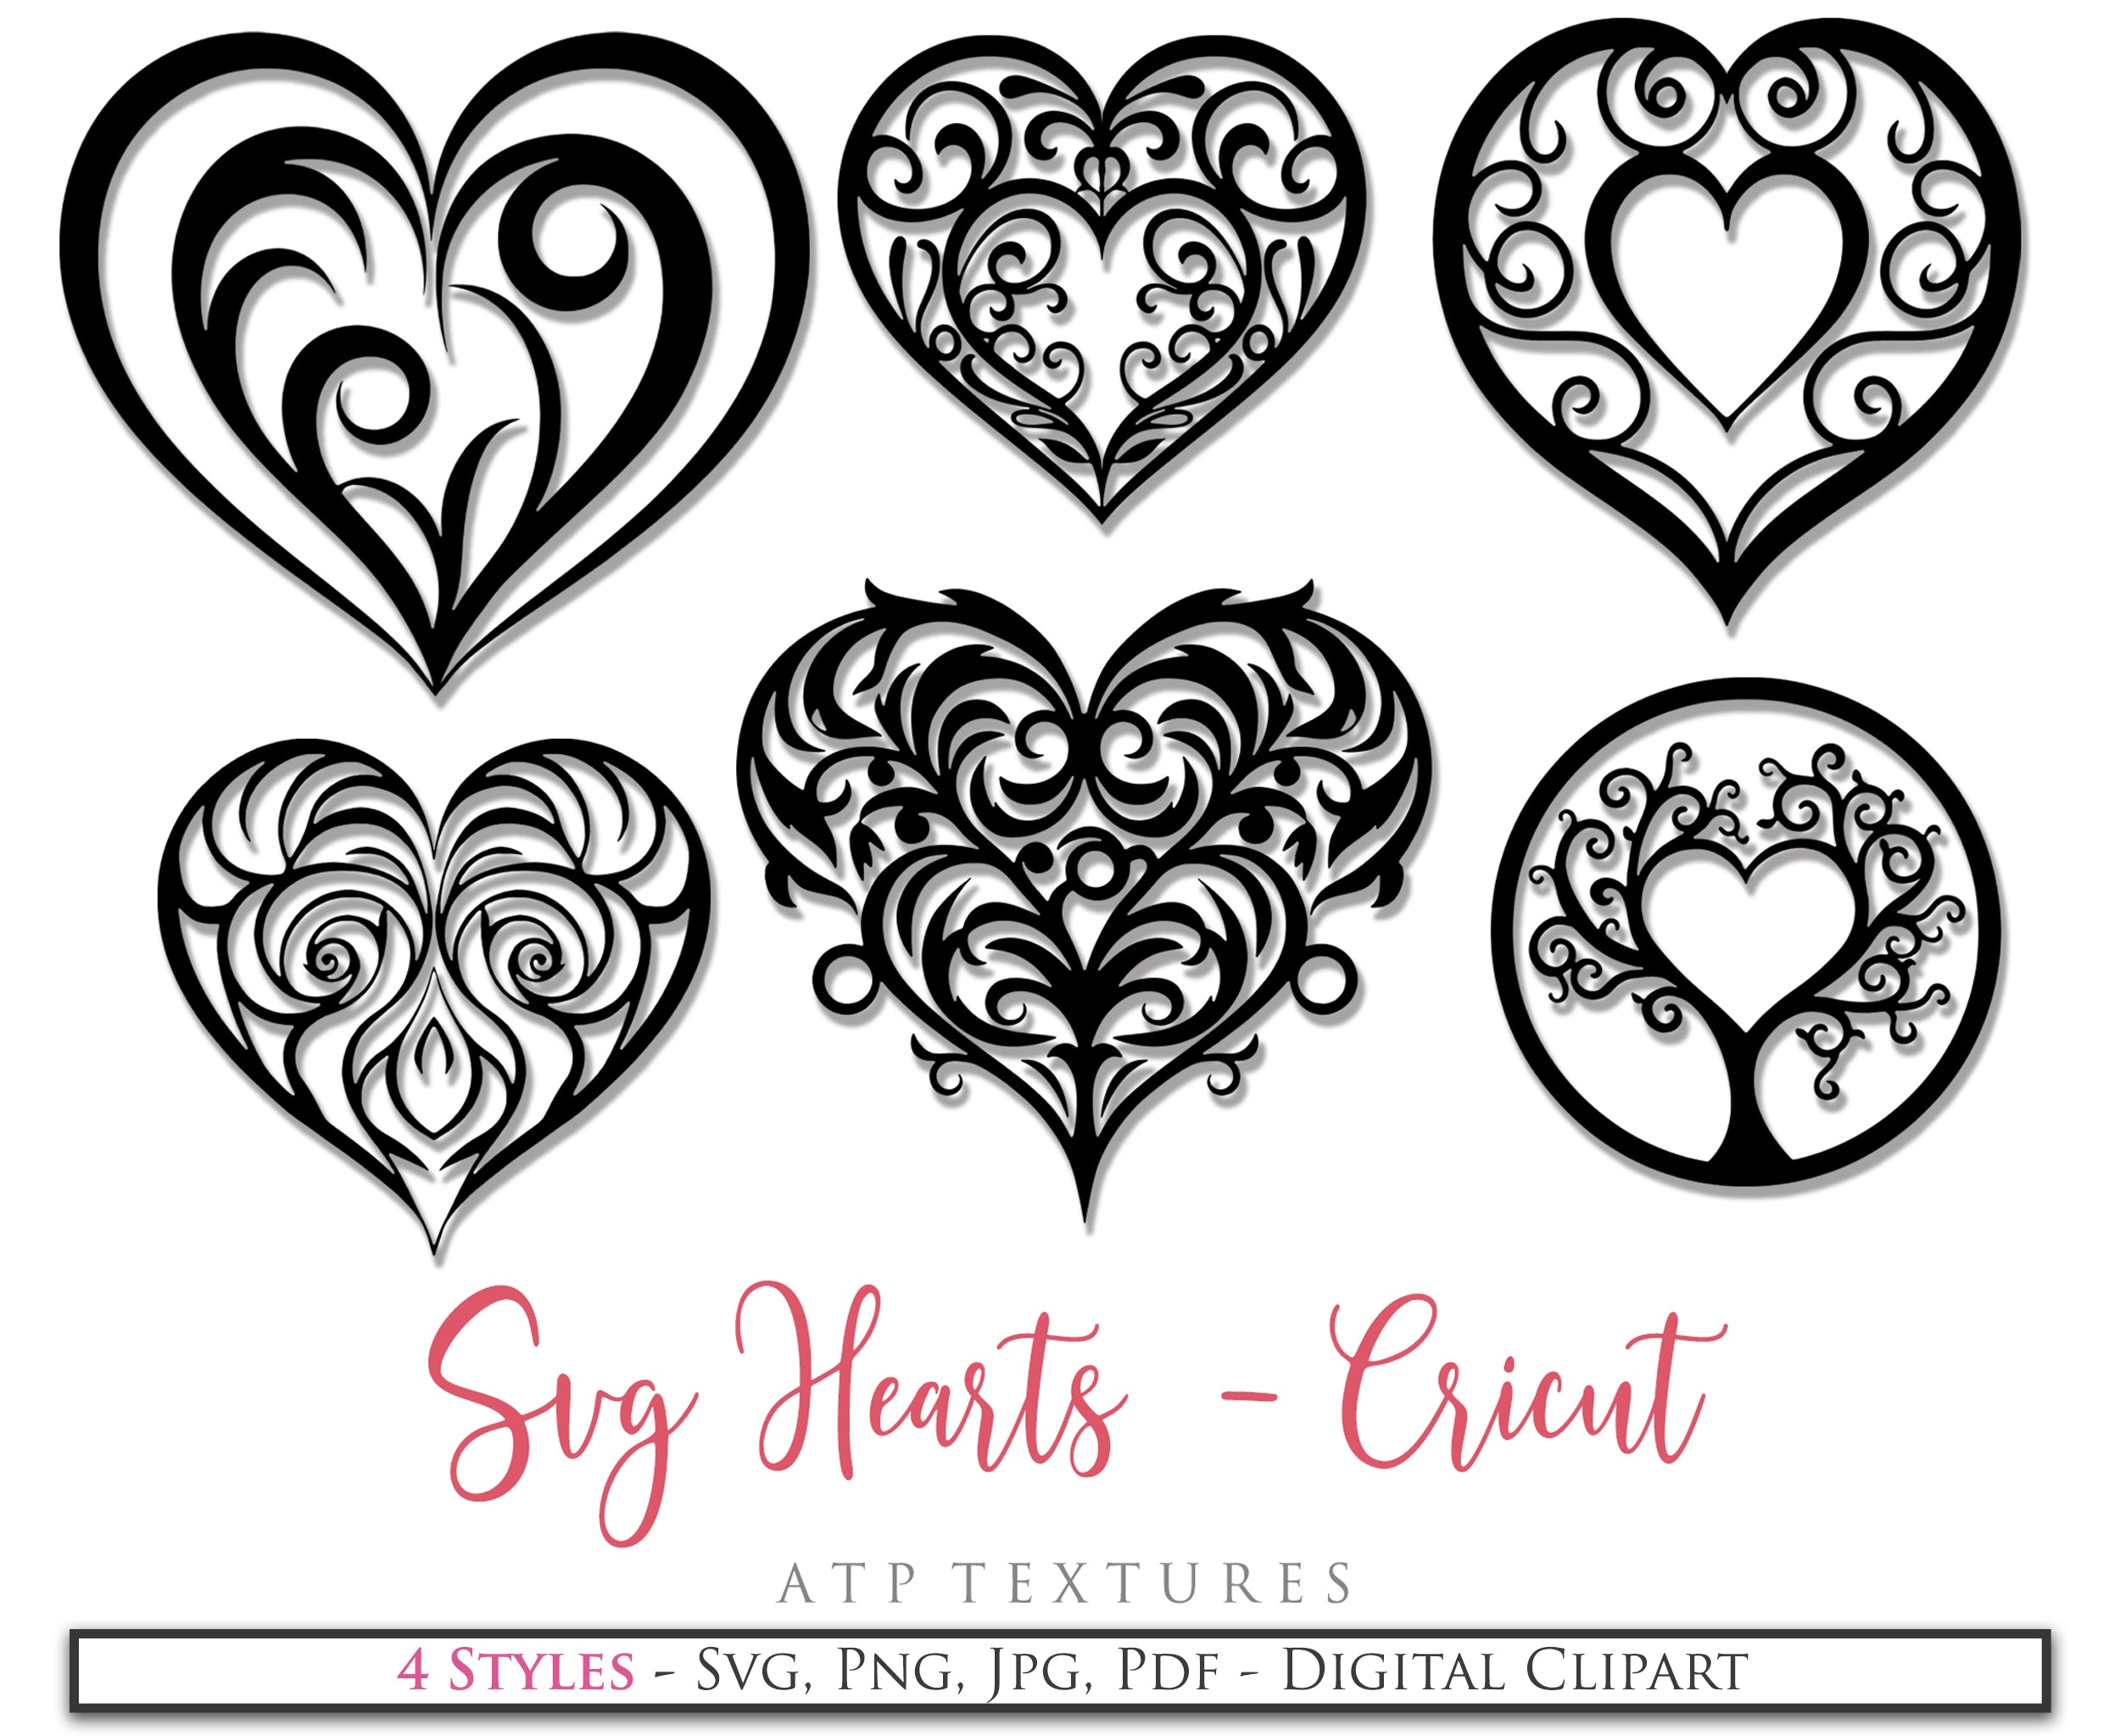 SVG Clipart for Cricut, Digital Art, Sublimation Print and Scrapbooking. Heart in High resolution.This is a digital product. This set includes 20 SVG & PNG Cat Clipart. The PNG files are all in high resolution,300dpi.If you wish to use them for your fine art prints and photography edits without losing quality, you can! ATP Textures